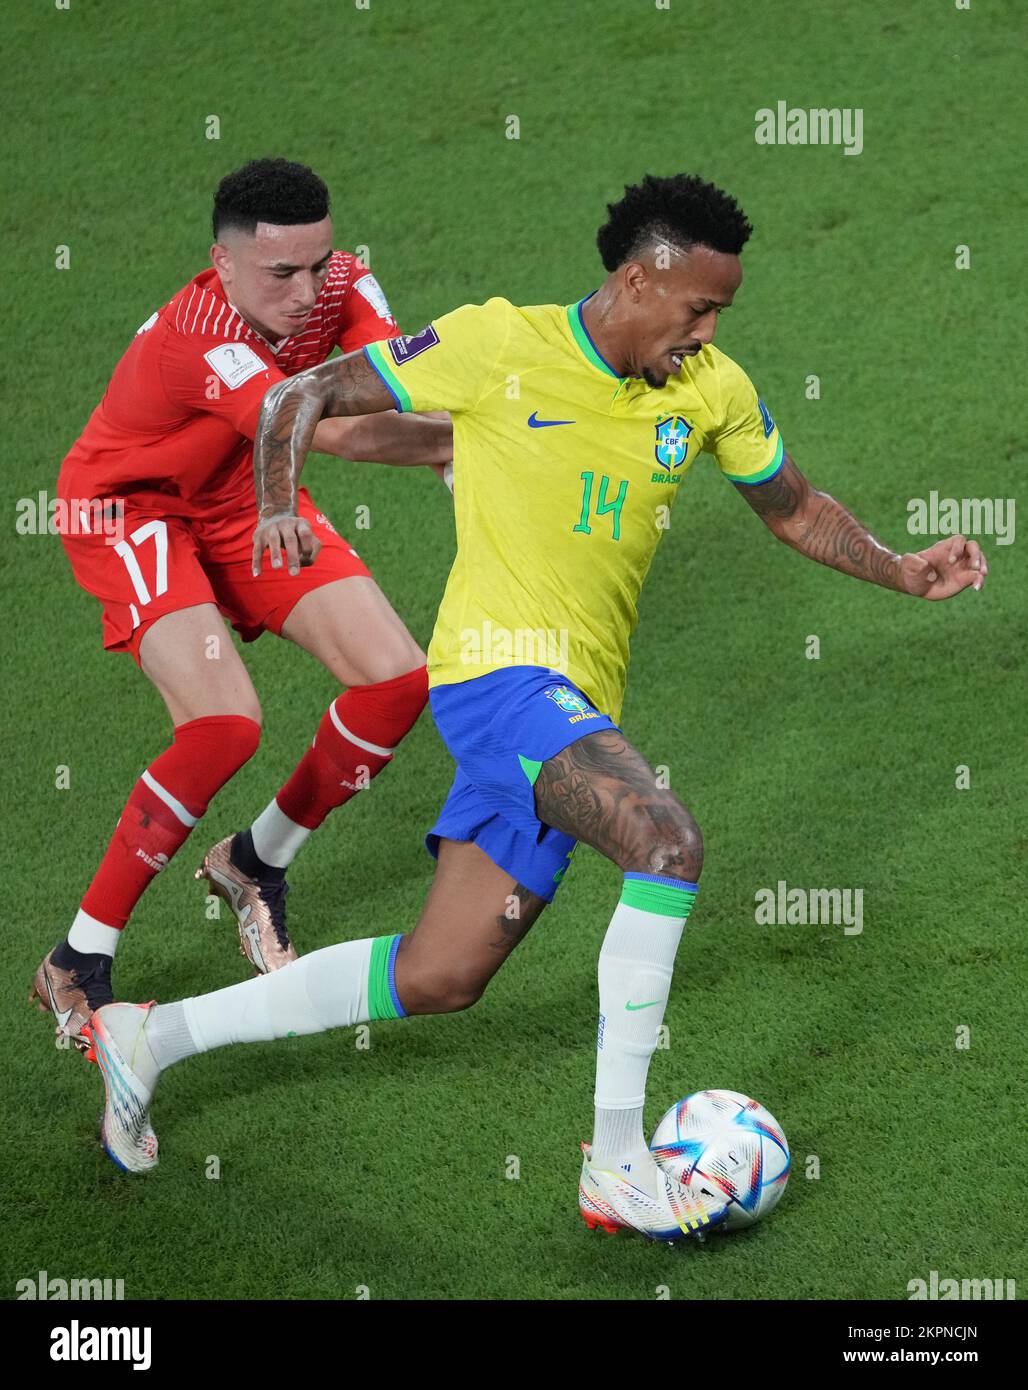 Doha, Qatar. 28th Nov, 2022. Eder Militao (R) of Brazil vies with Ruben Vargas of Switzerland during the Group G match between Brazil and Switzerland at the 2022 FIFA World Cup at Ras Abu Aboud (974) Stadium in Doha, Qatar, Nov. 28, 2022. Credit: Meng Yongmin/Xinhua/Alamy Live News Stock Photo